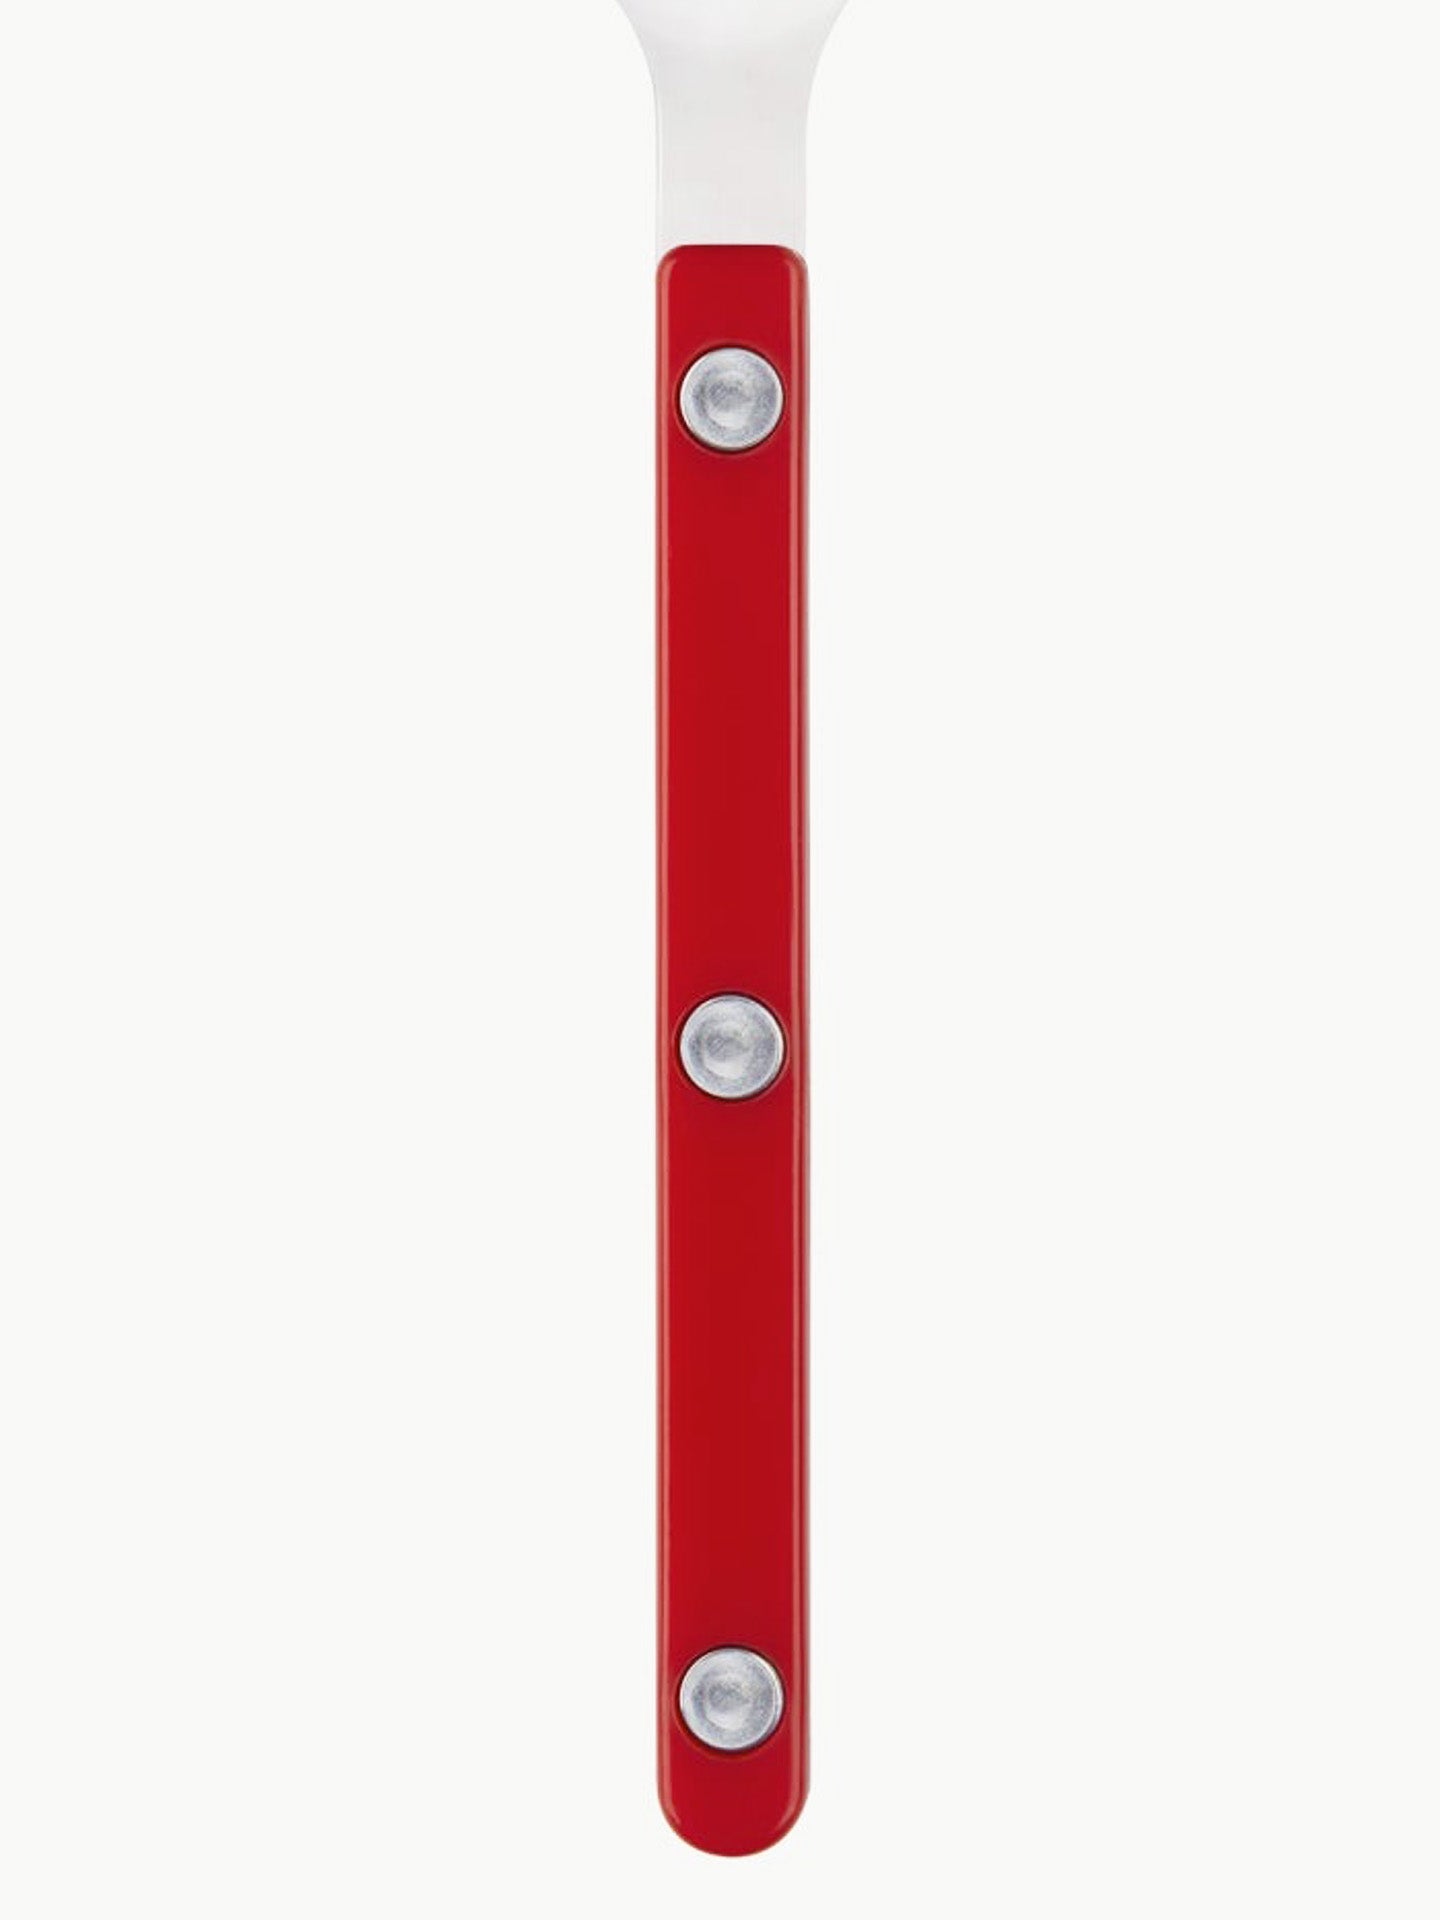 The fire-engine red is a classic colour of the French bistros. The stainless steel and acrylic handle combo is dishwasher safe so the cutleries in the red Bistro series are easy to clean!